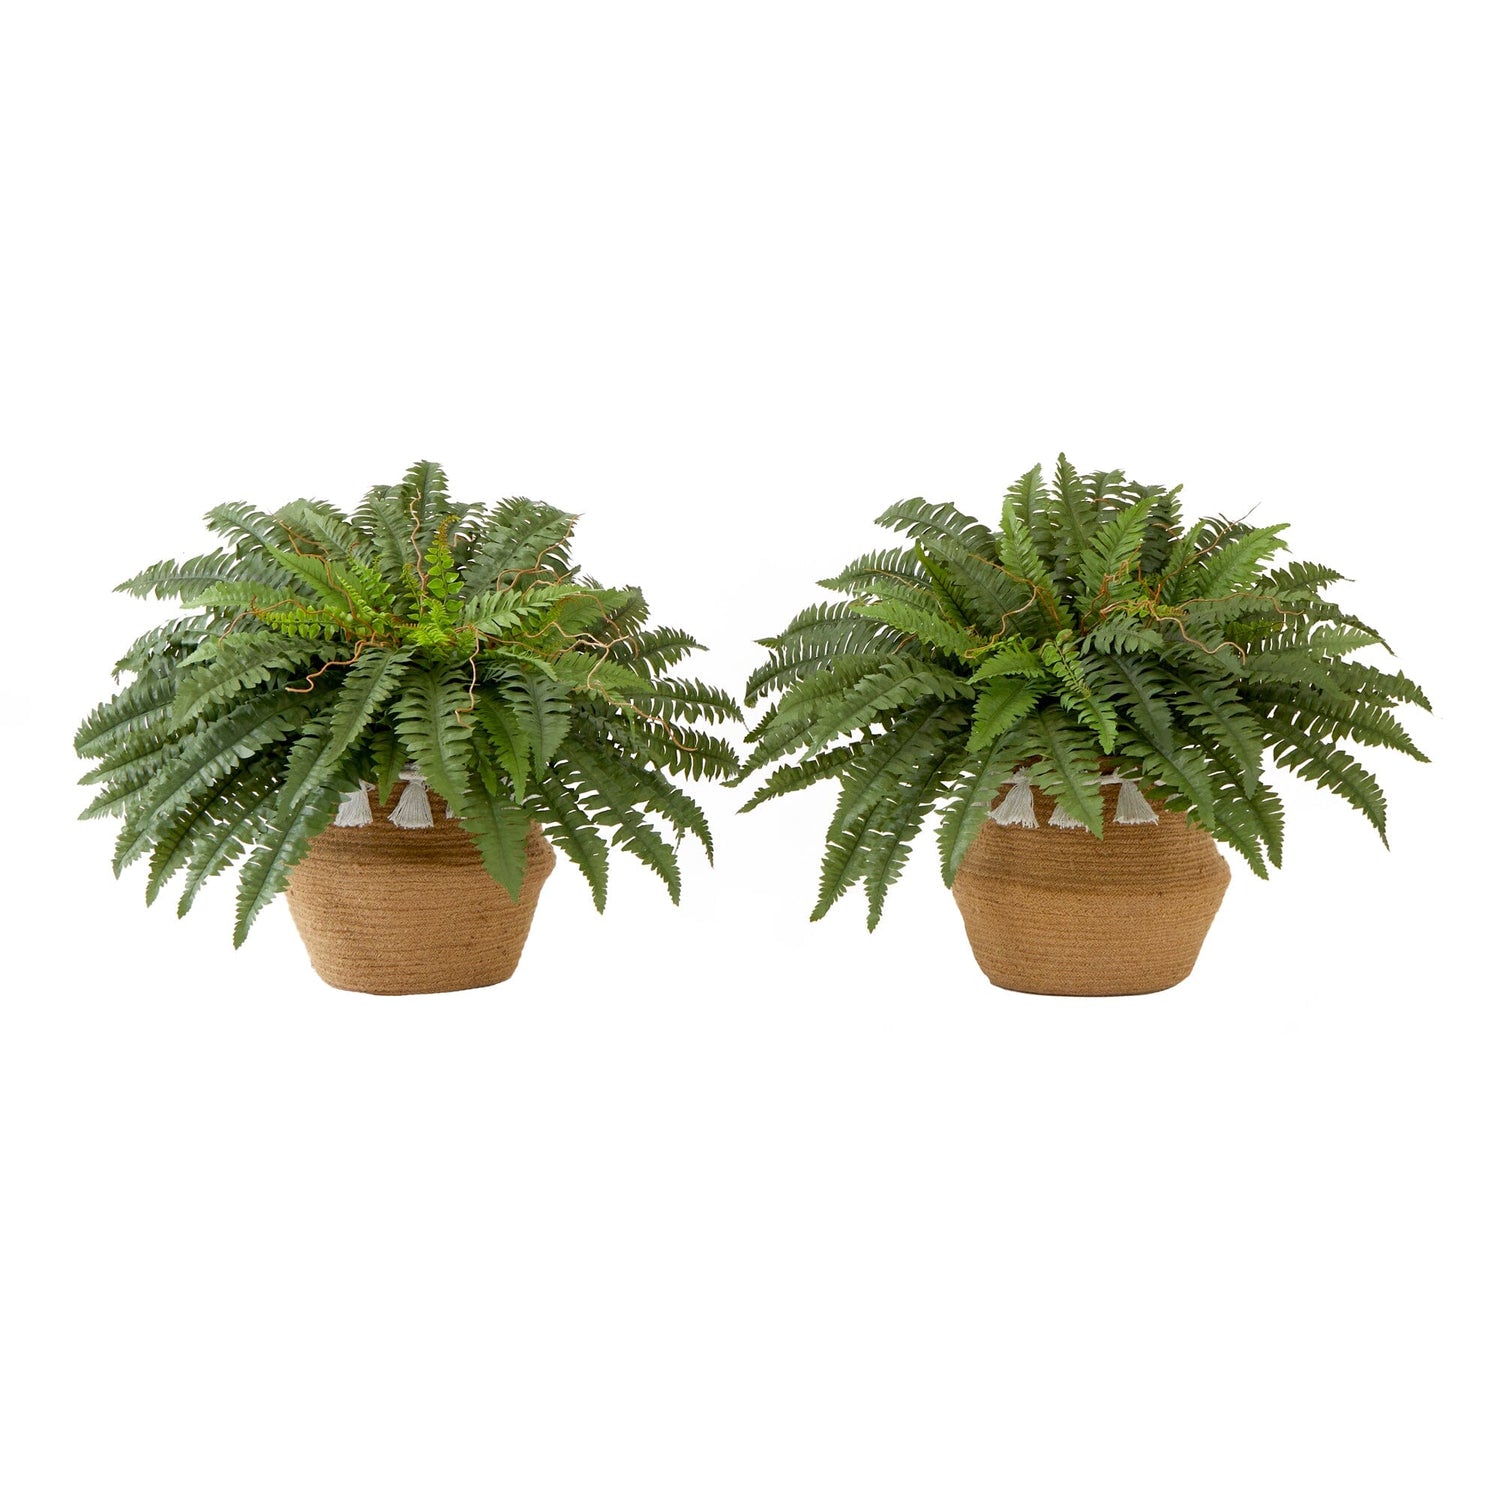 23” Artificial Boston Fern Plant with Handmade Jute & Cotton Basket with Tassels DIY KIT - Set of 2